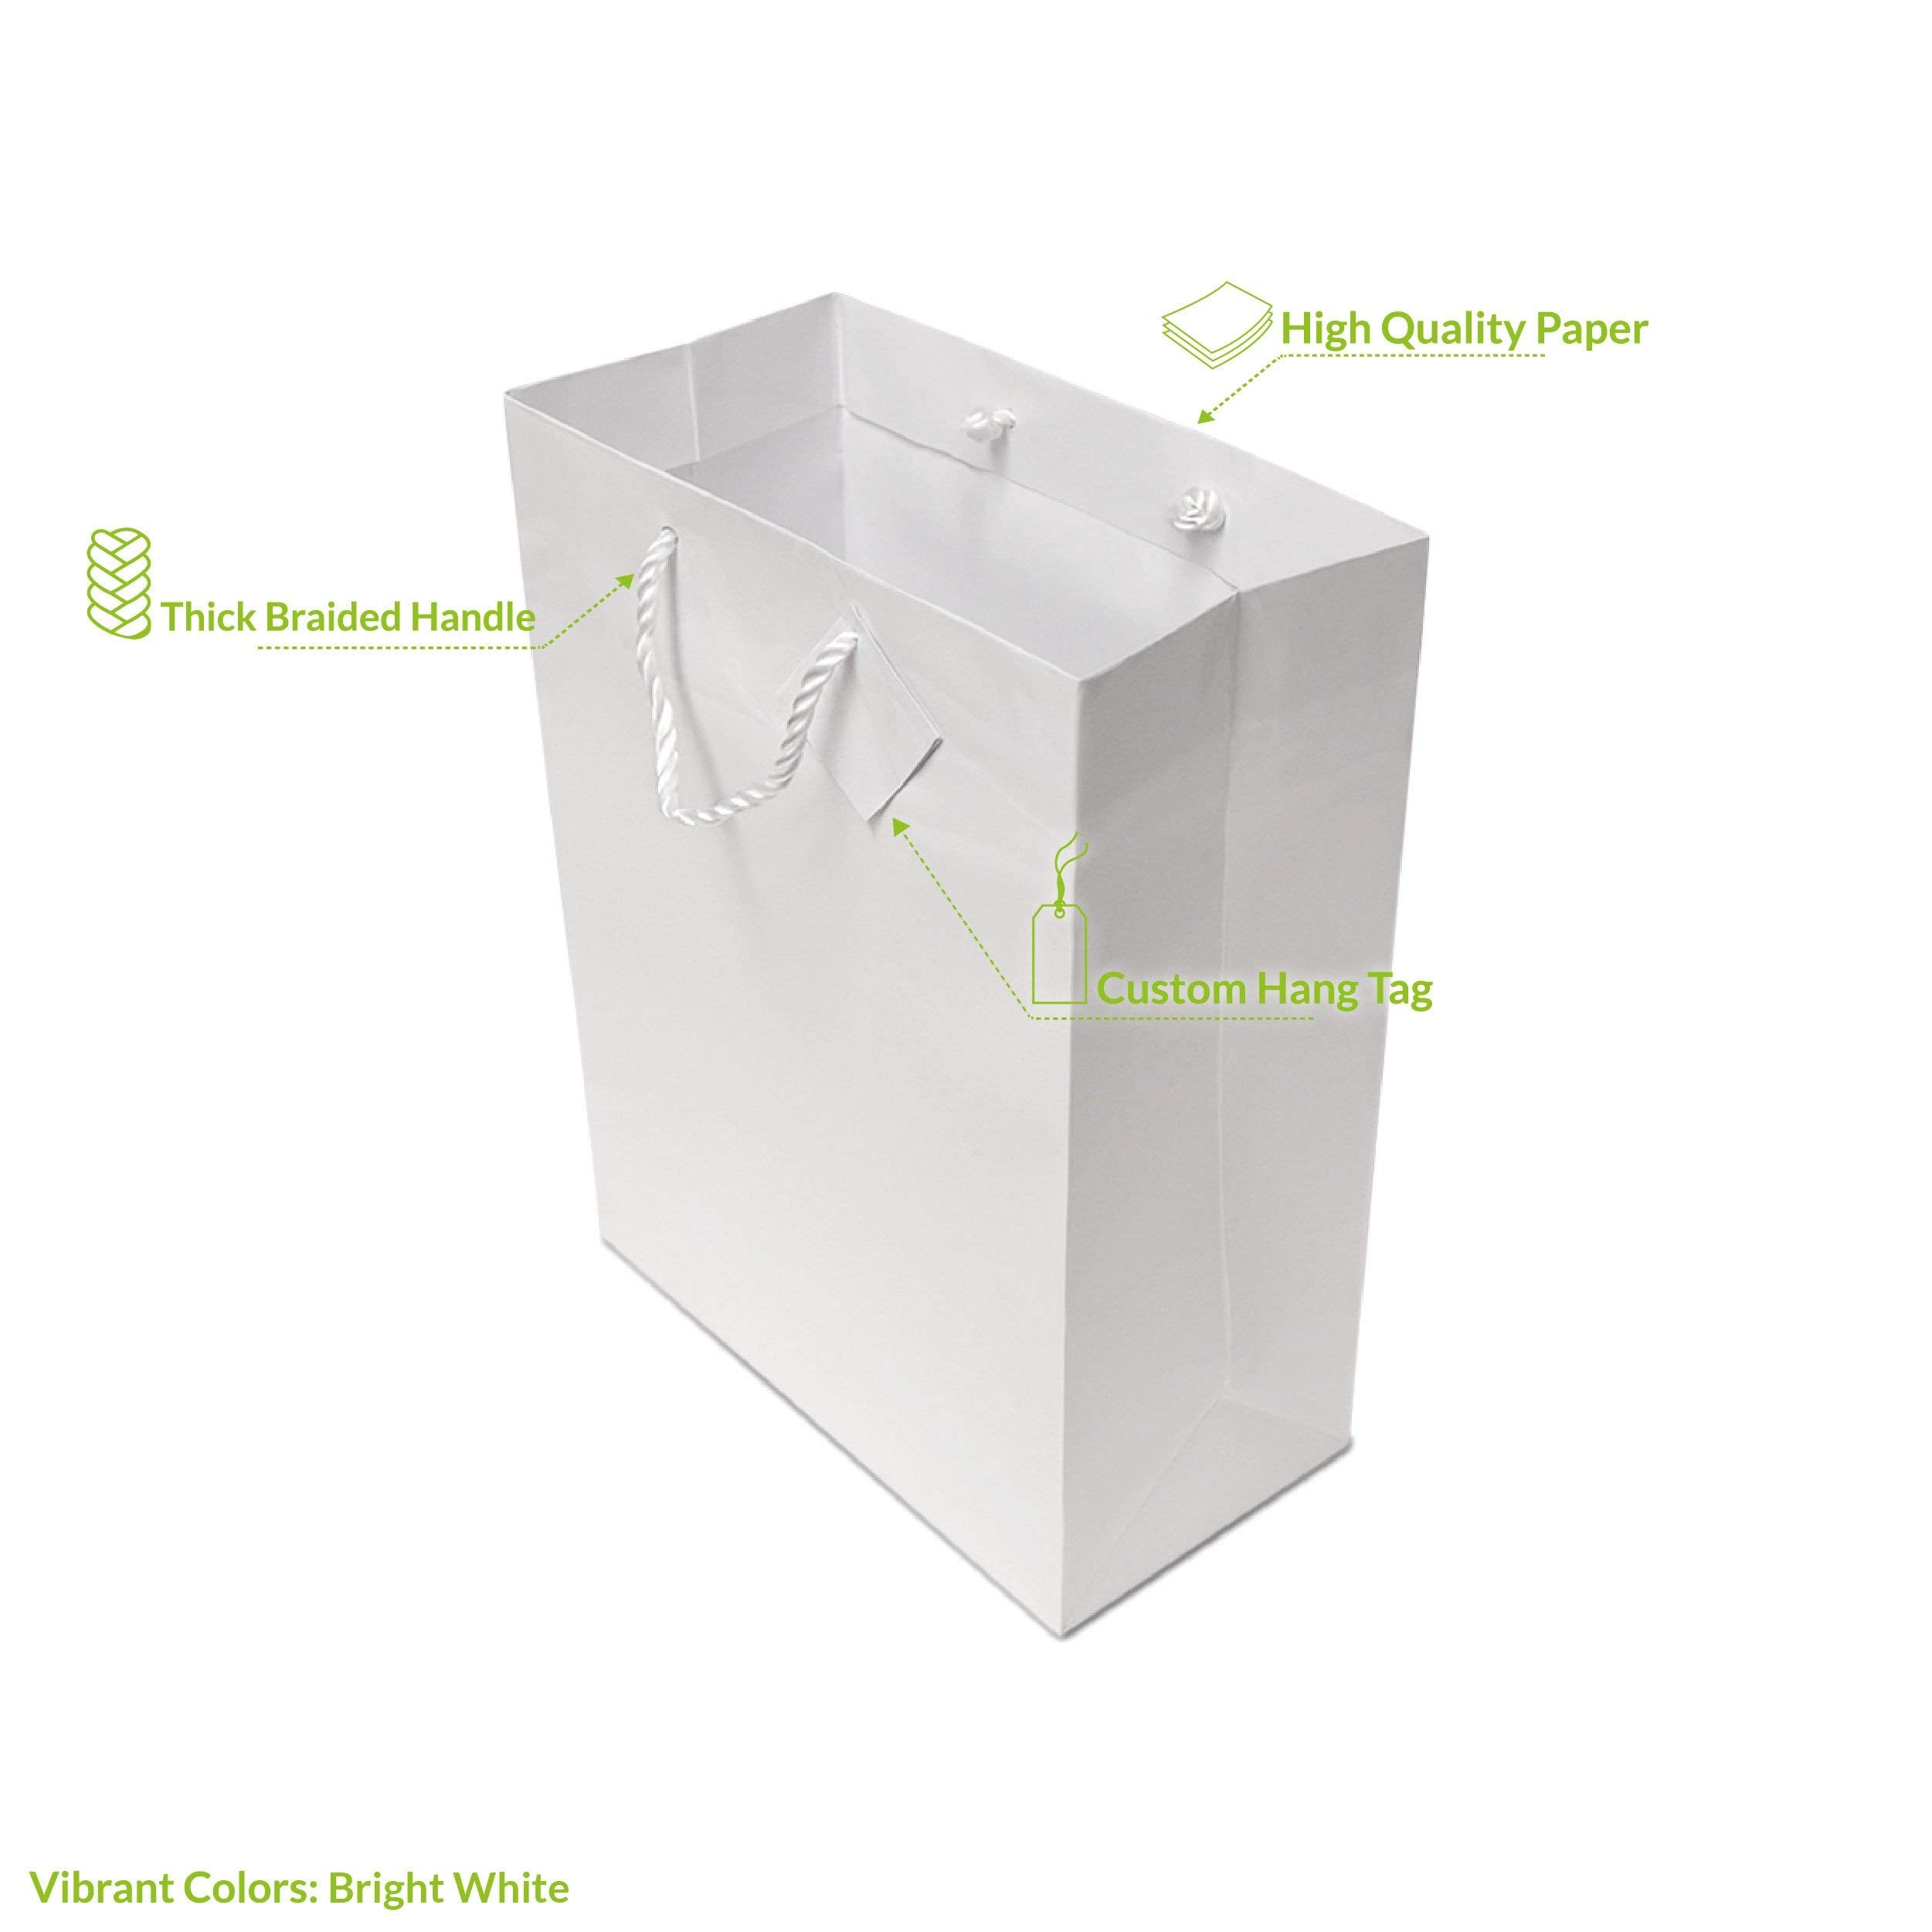 White Gift Bags - 12 Pack Medium Gloss White Gift Bags with Handles, Totes for Holiday & Christmas Gift Wrap, Bachelorette, Wedding & Party Favors, Baby Showers, Birthday Presents, Bulk - 7.5x3.5x9  - Acceptable